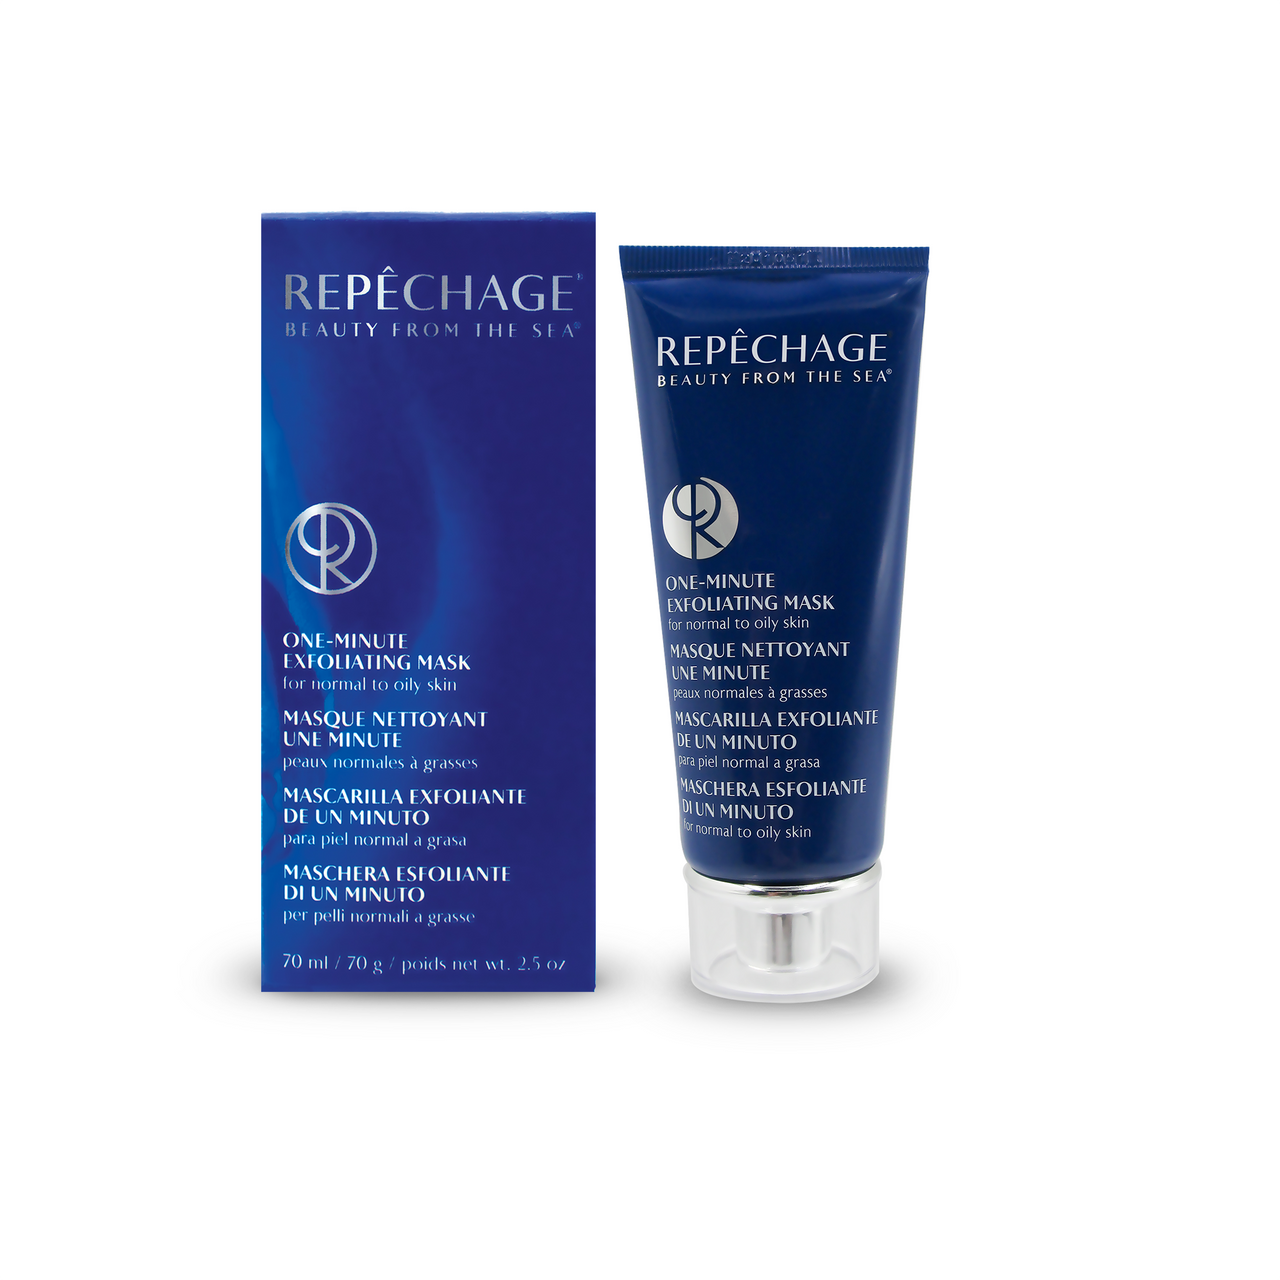 Repechage One-Minute Exfoliating Mask - 2.37 oz (RR61)